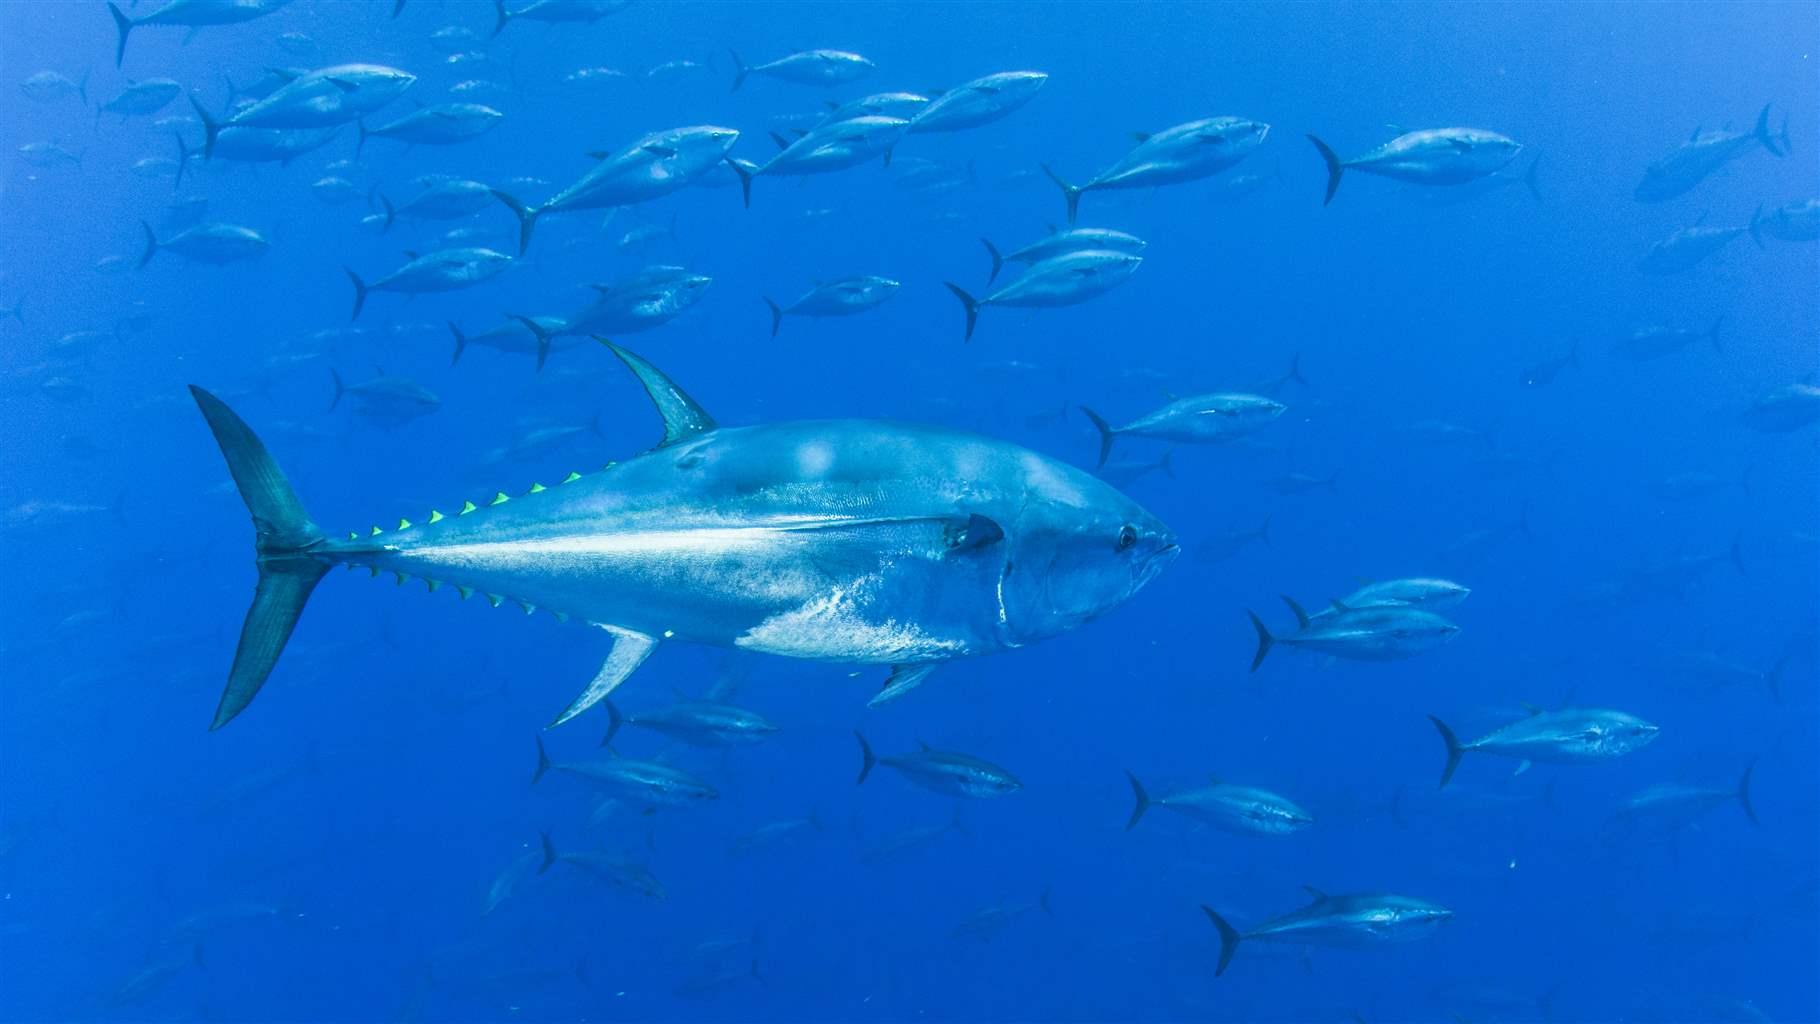 Higher Fishing Limits Proposed for Pacific Bluefin Tuna Would Threaten Fragile Population